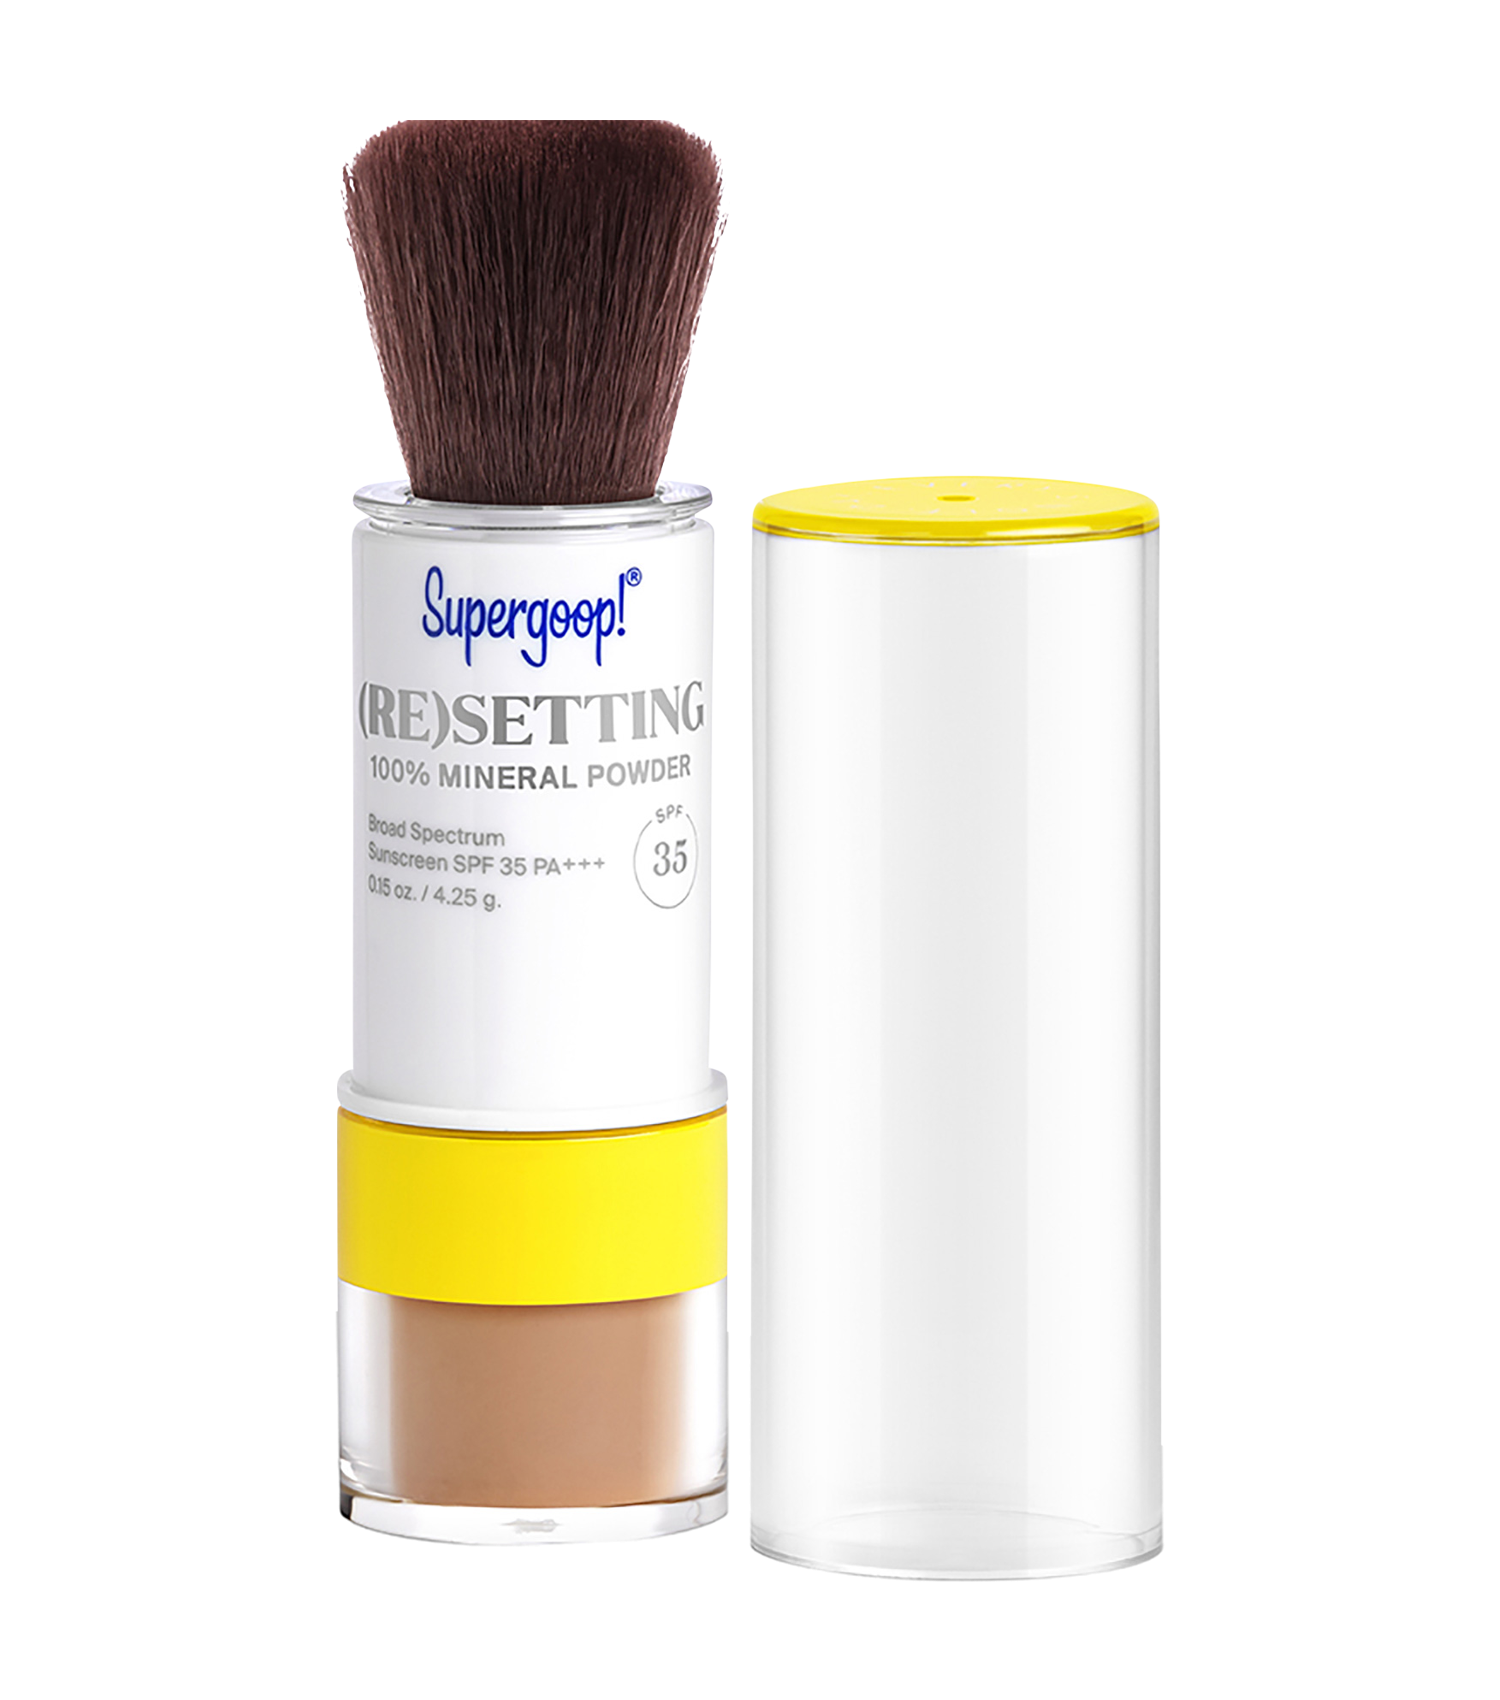 Supergoop! (Re)setting 100% Mineral Powder PA+++ SPF 35